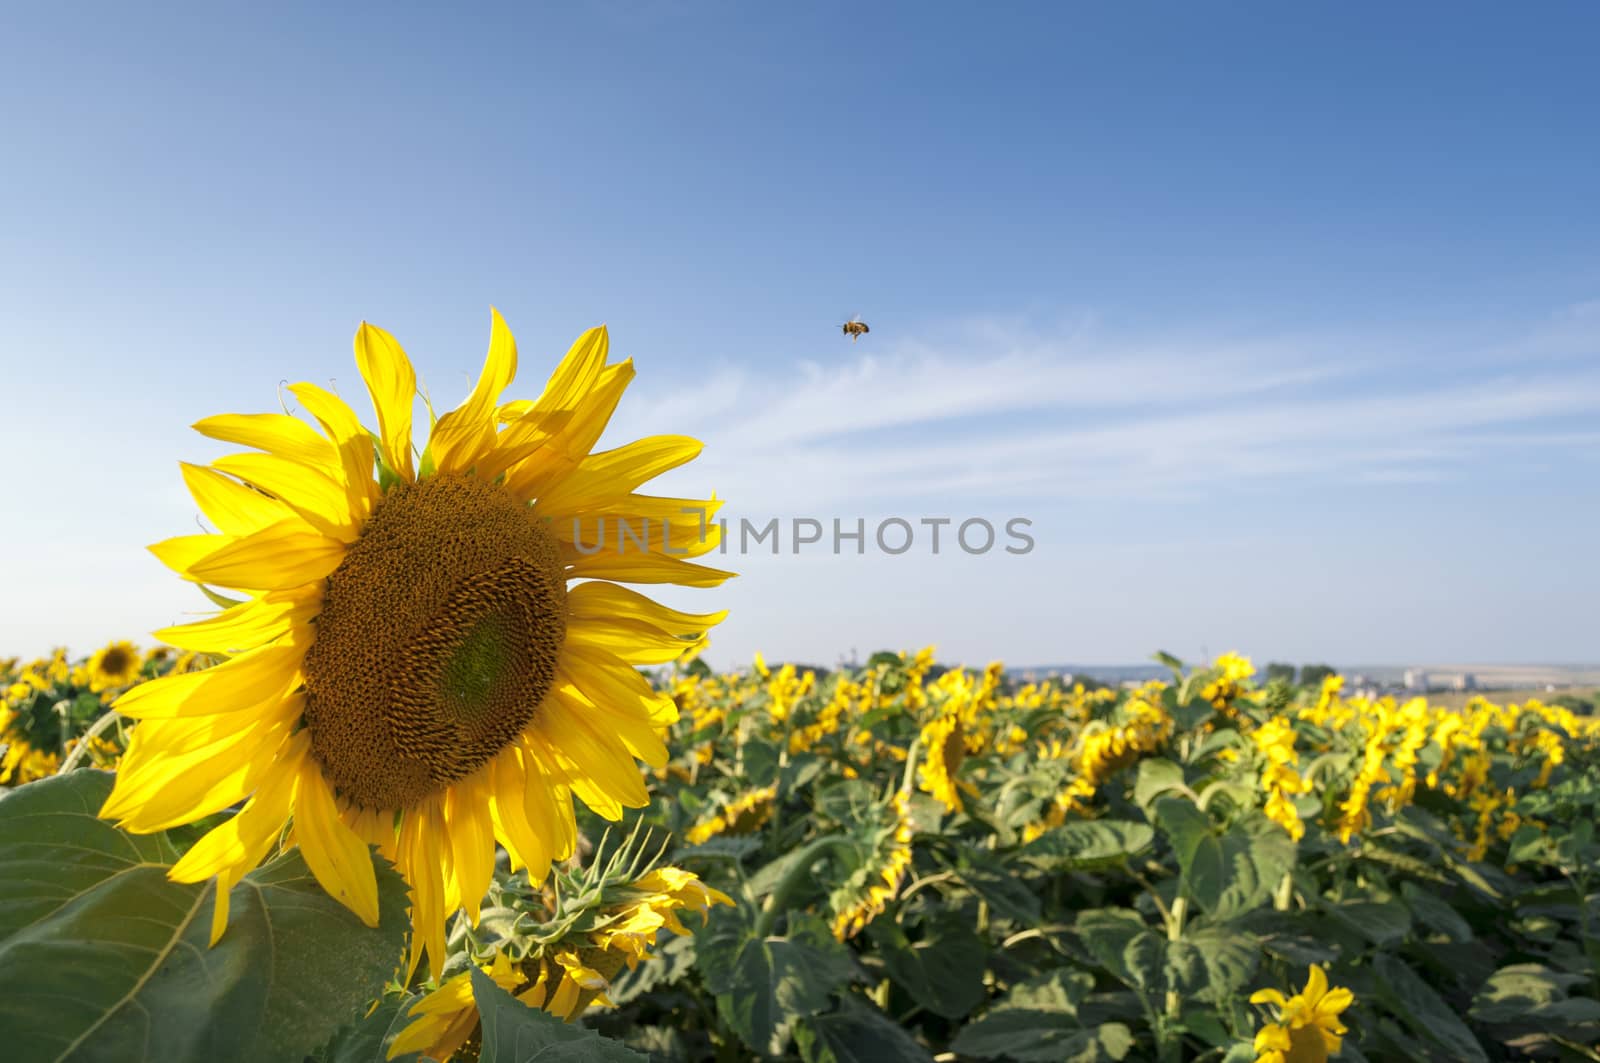 Field of sunflowers and blue sky in the background